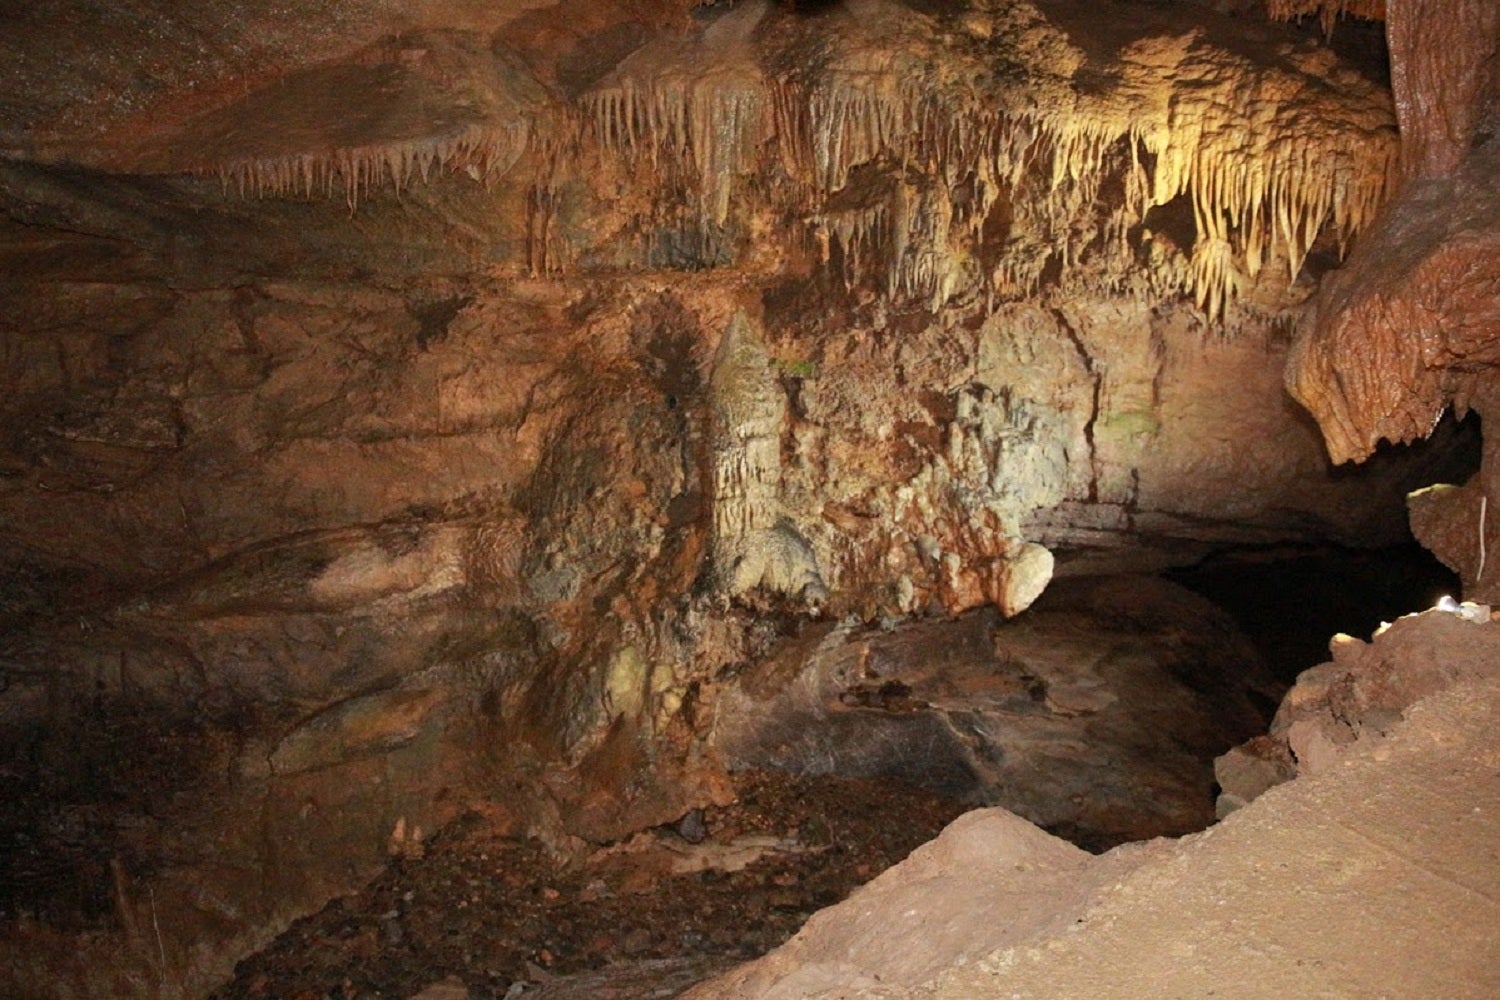 Stalactite formations on the roof of Tuckleechee Caverns in Tennessee